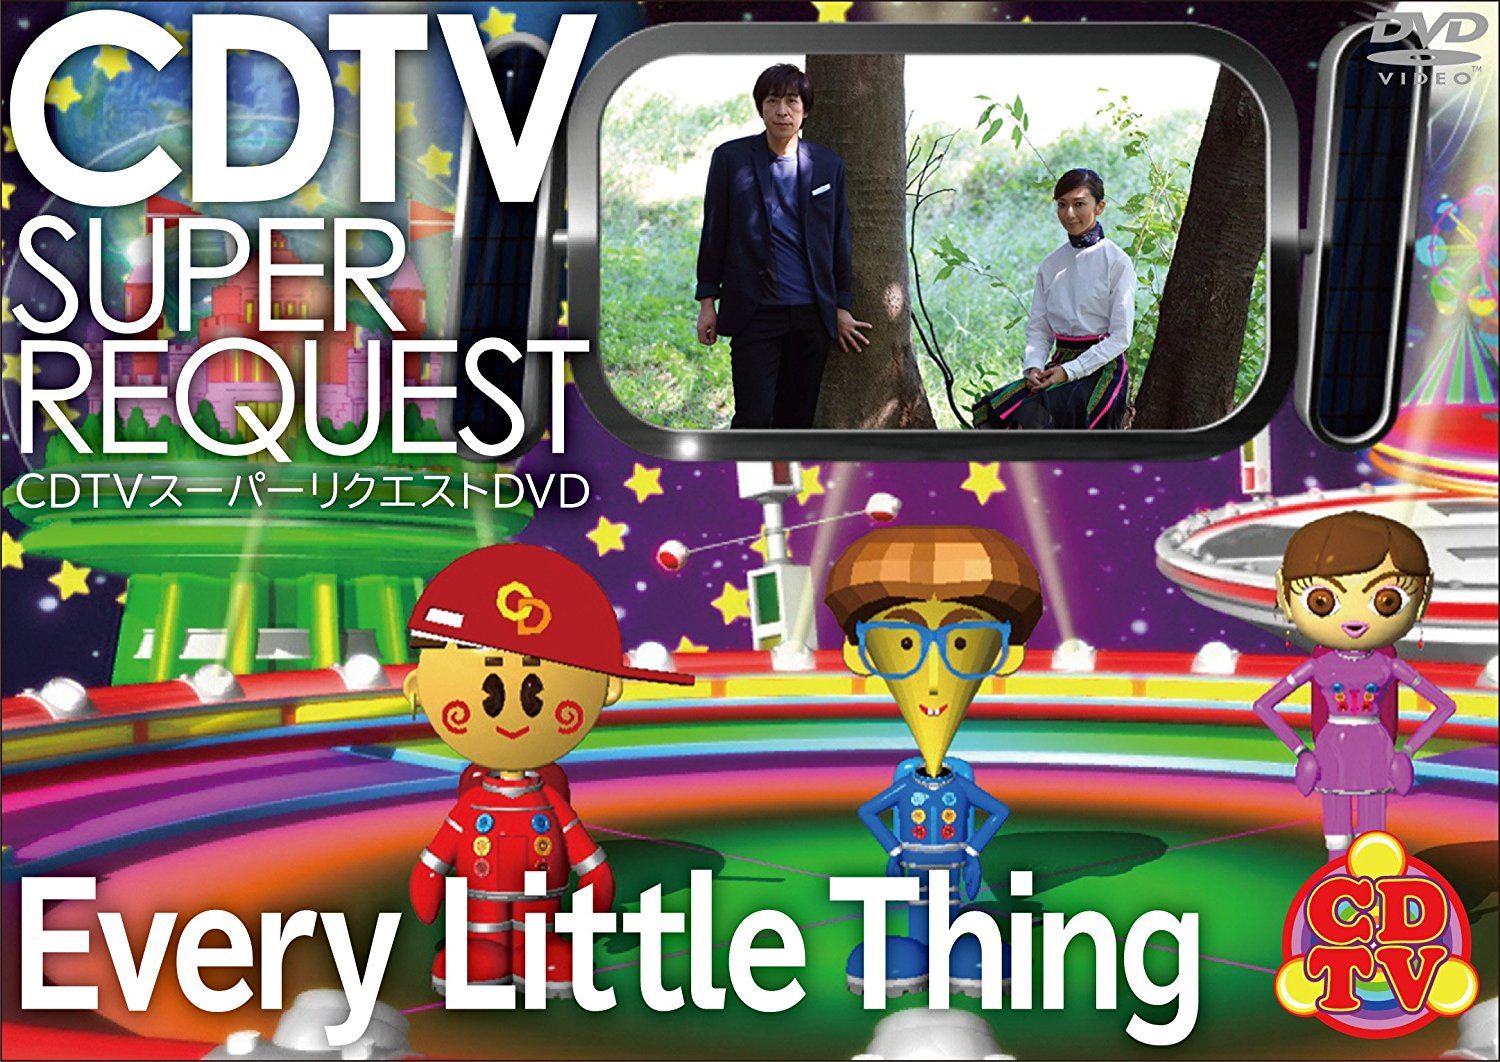 CDTV Super Request Dvd - Every Little Thing